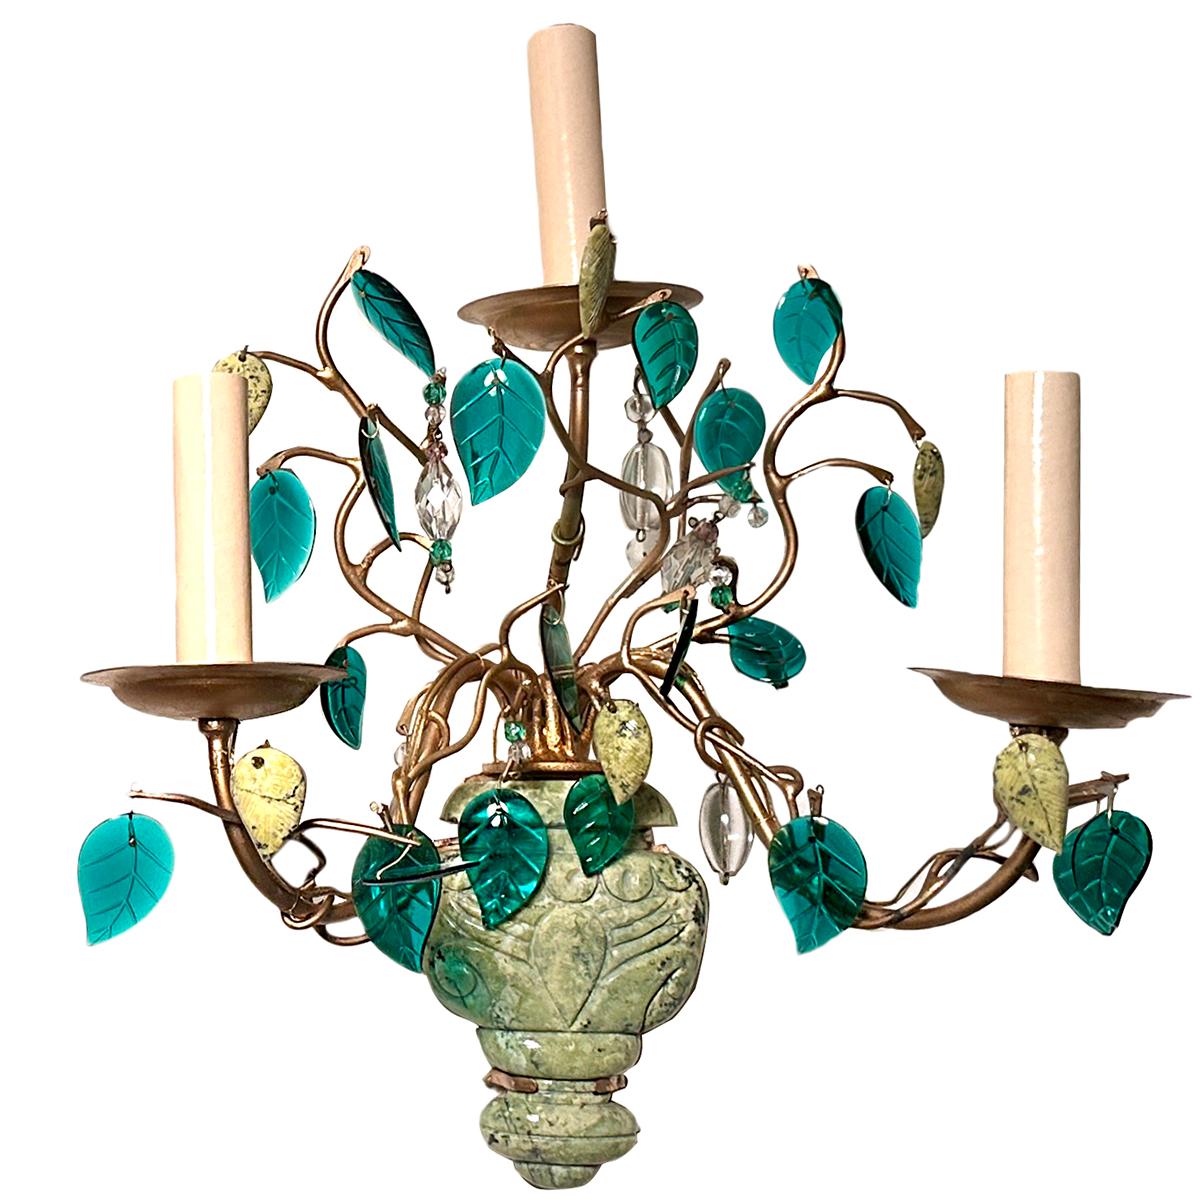 A set of 4 green semi precious stone gilt sconces with glass leaves. Sold per pair. Sold in pairs.

Measurements:
Height: 15